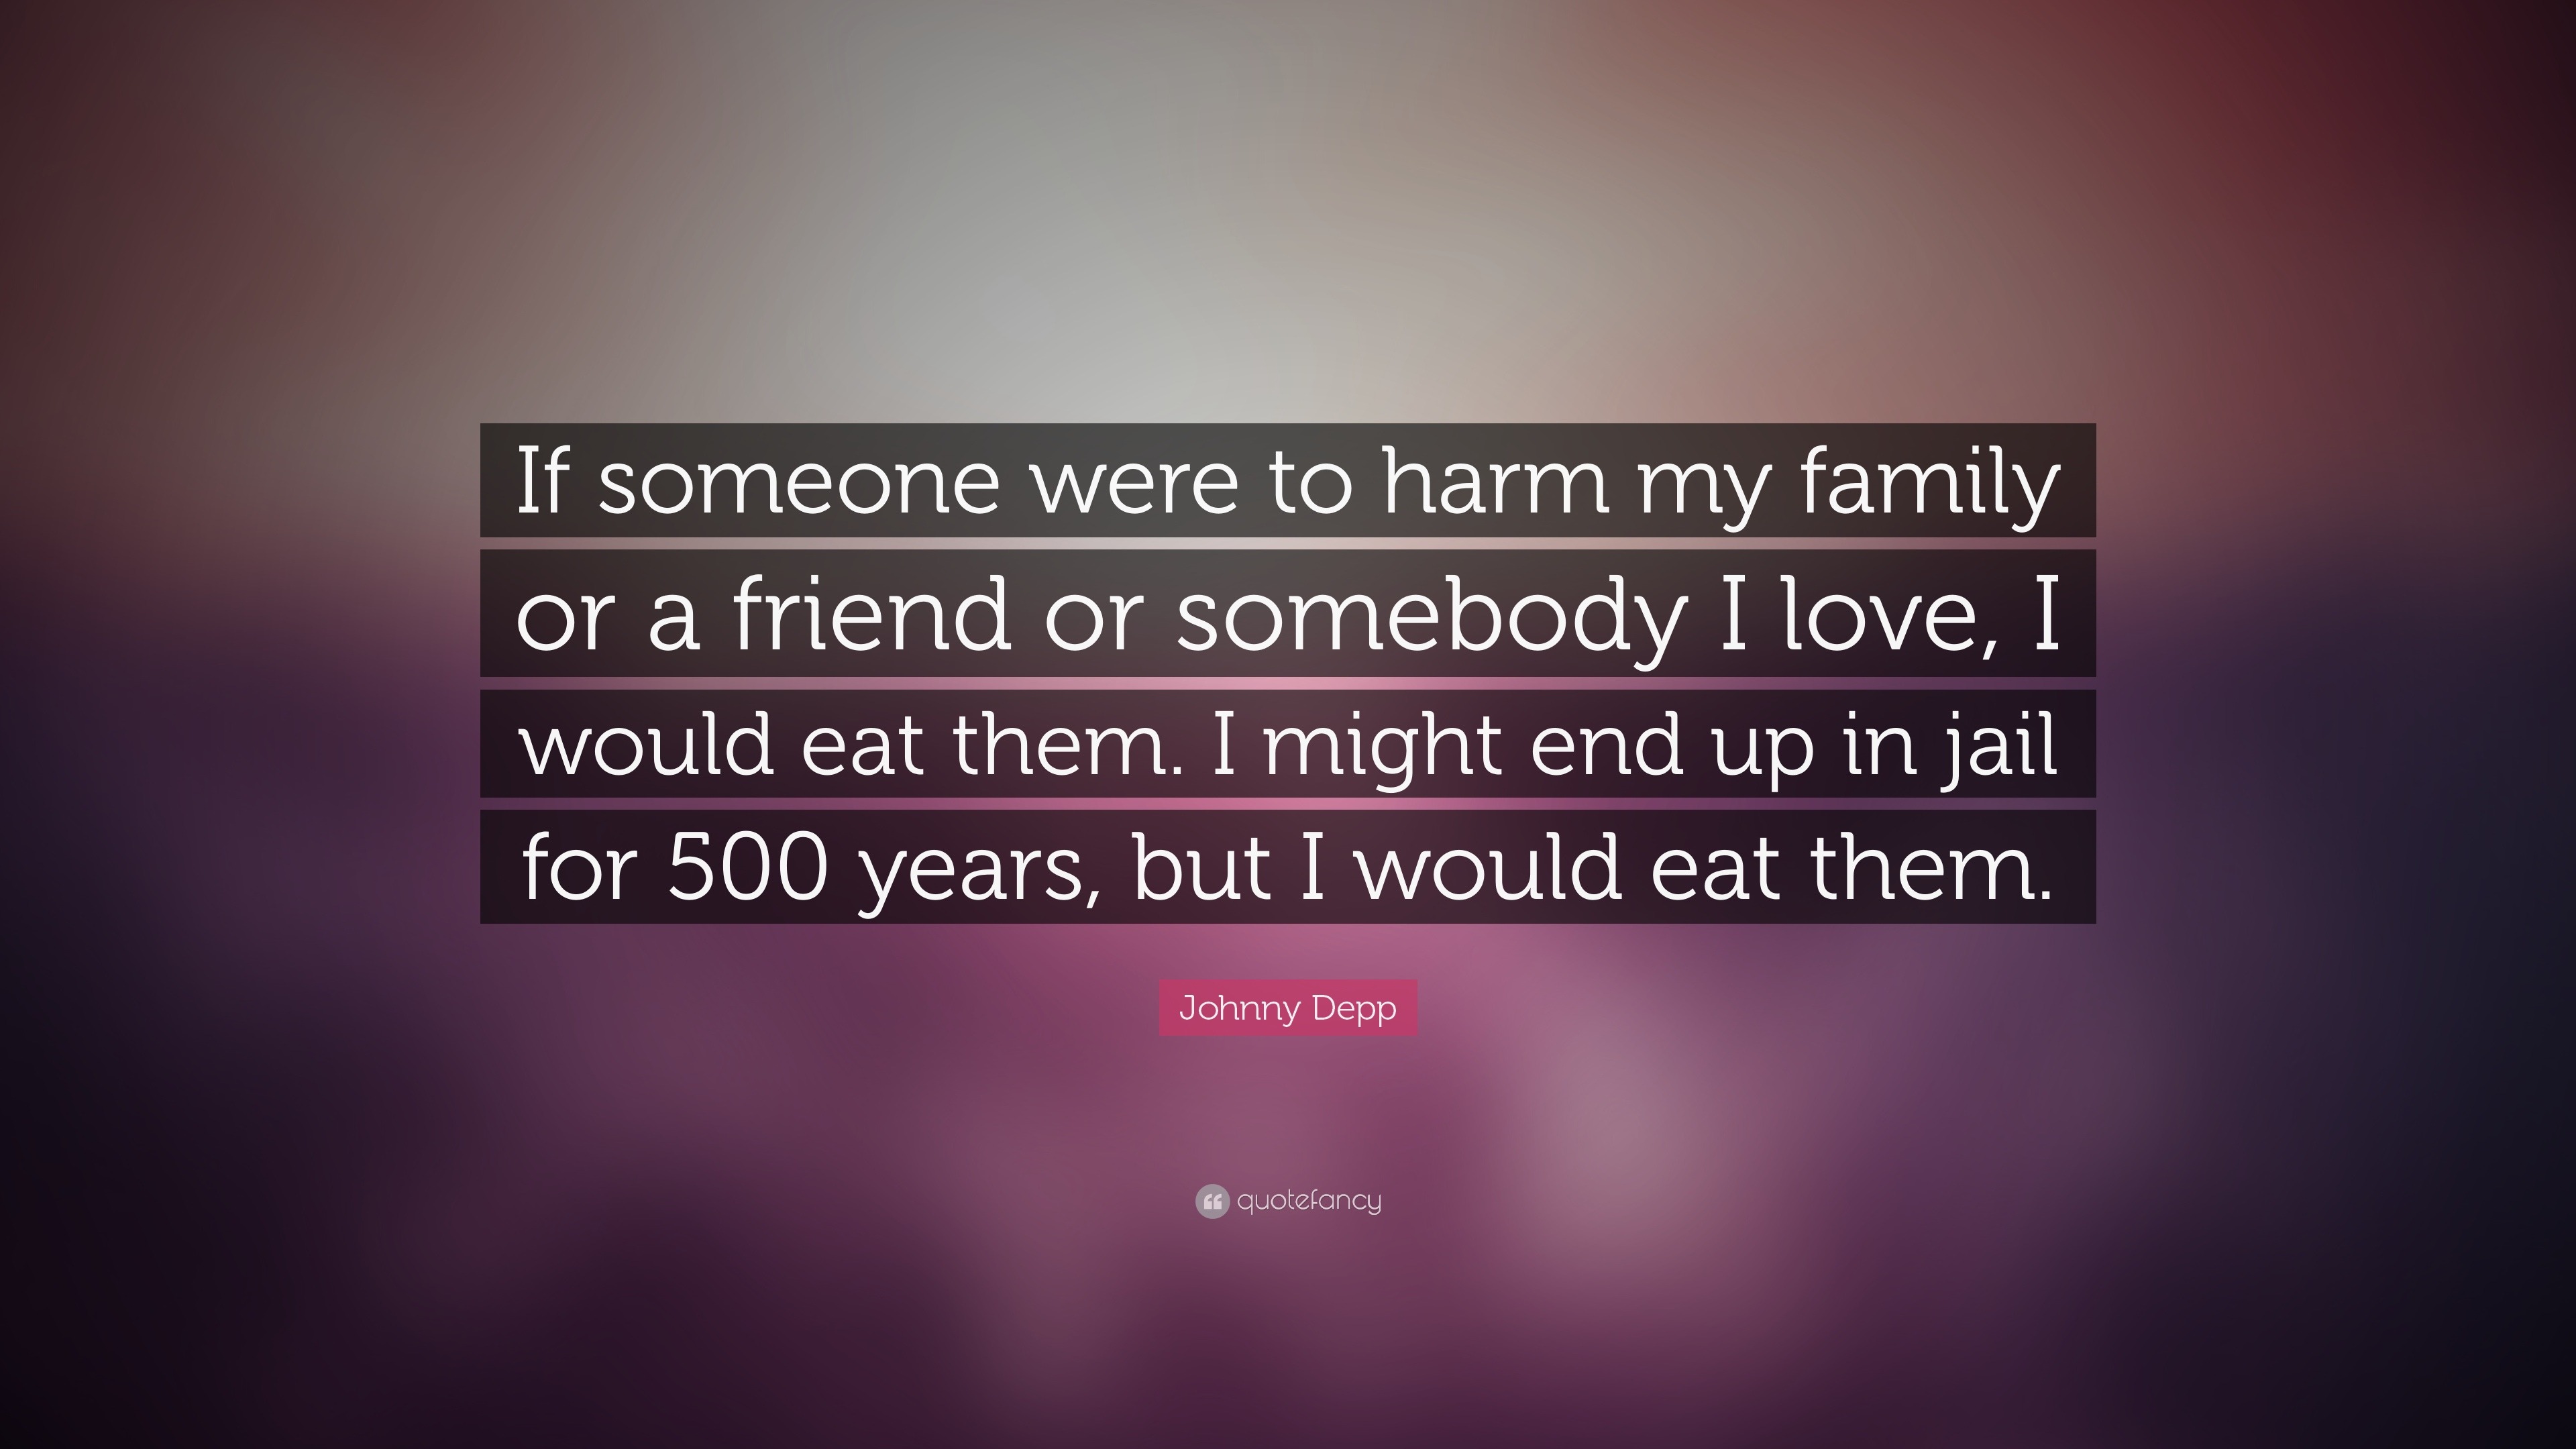 Johnny Depp Quote “If someone were to harm my family or a friend or